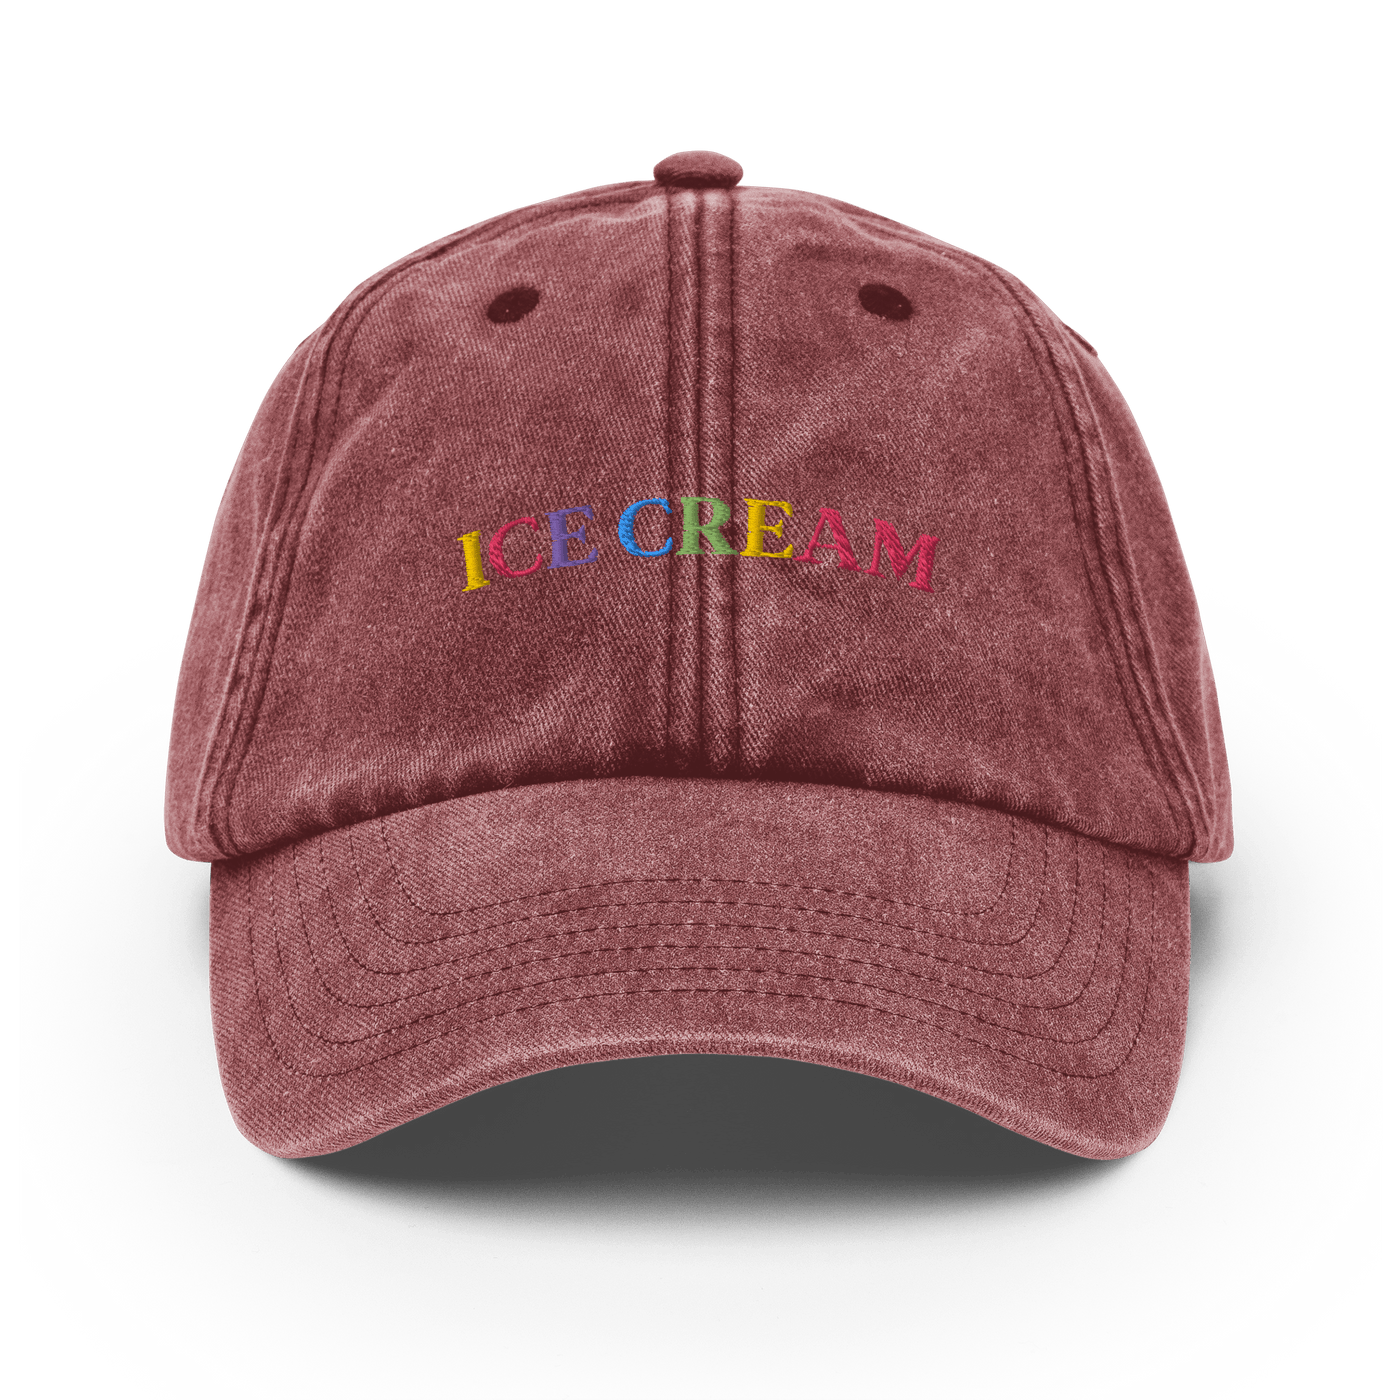 Ice Cream Text Vintage Hat - Vintage Red - - Just Another Cap Store